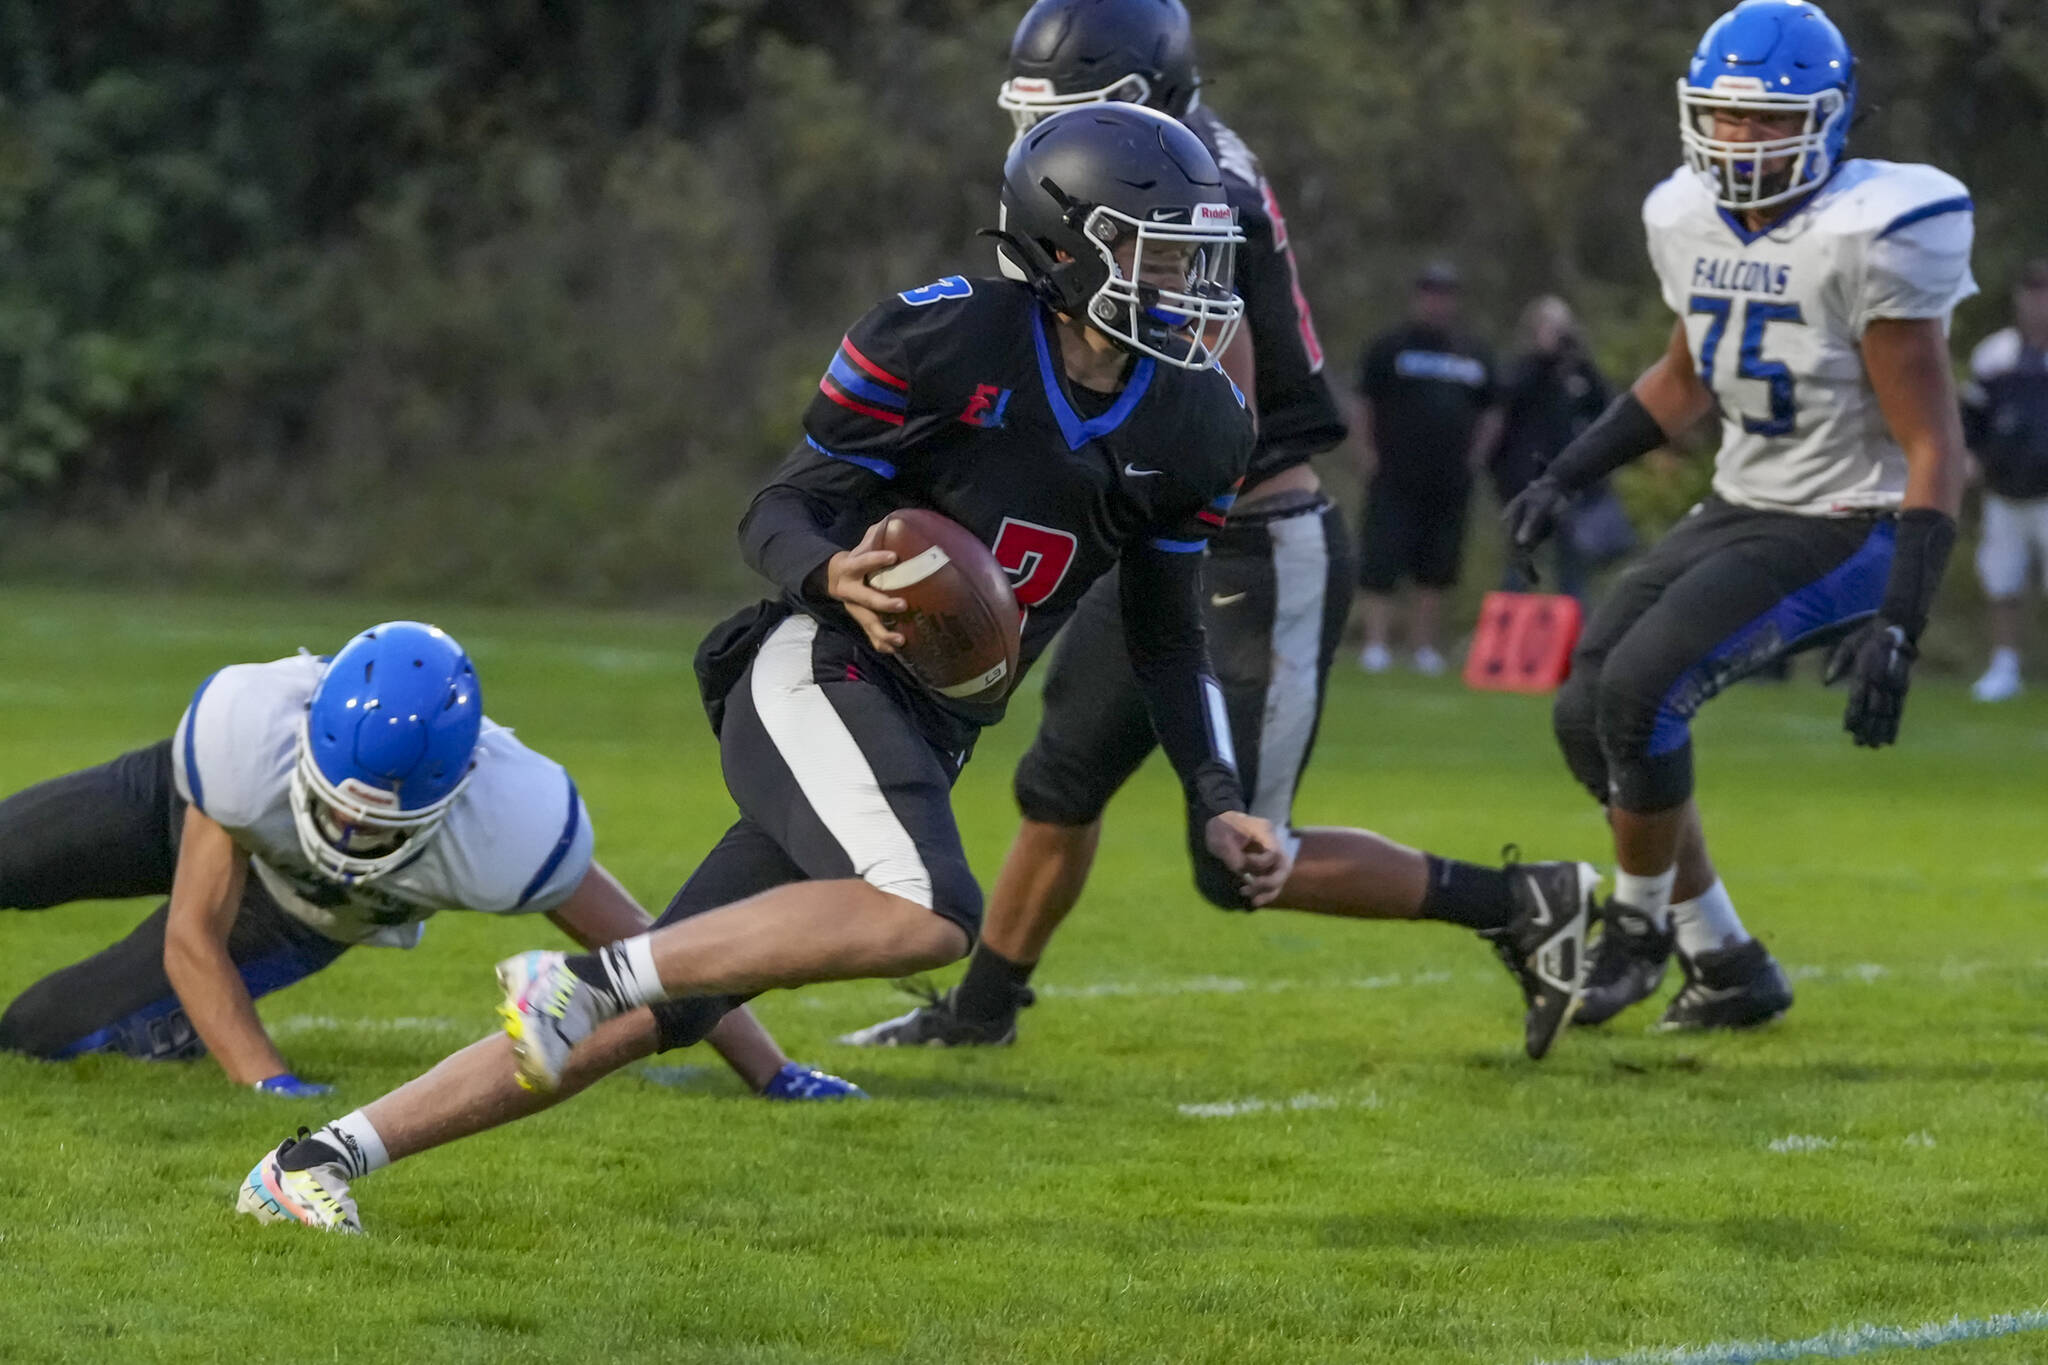 Rivals’ QB Cash Holmes eludes a South Whidbey defender and looks for a receiver downfield during a game Friday night at Memorial Field in Port Townsend.